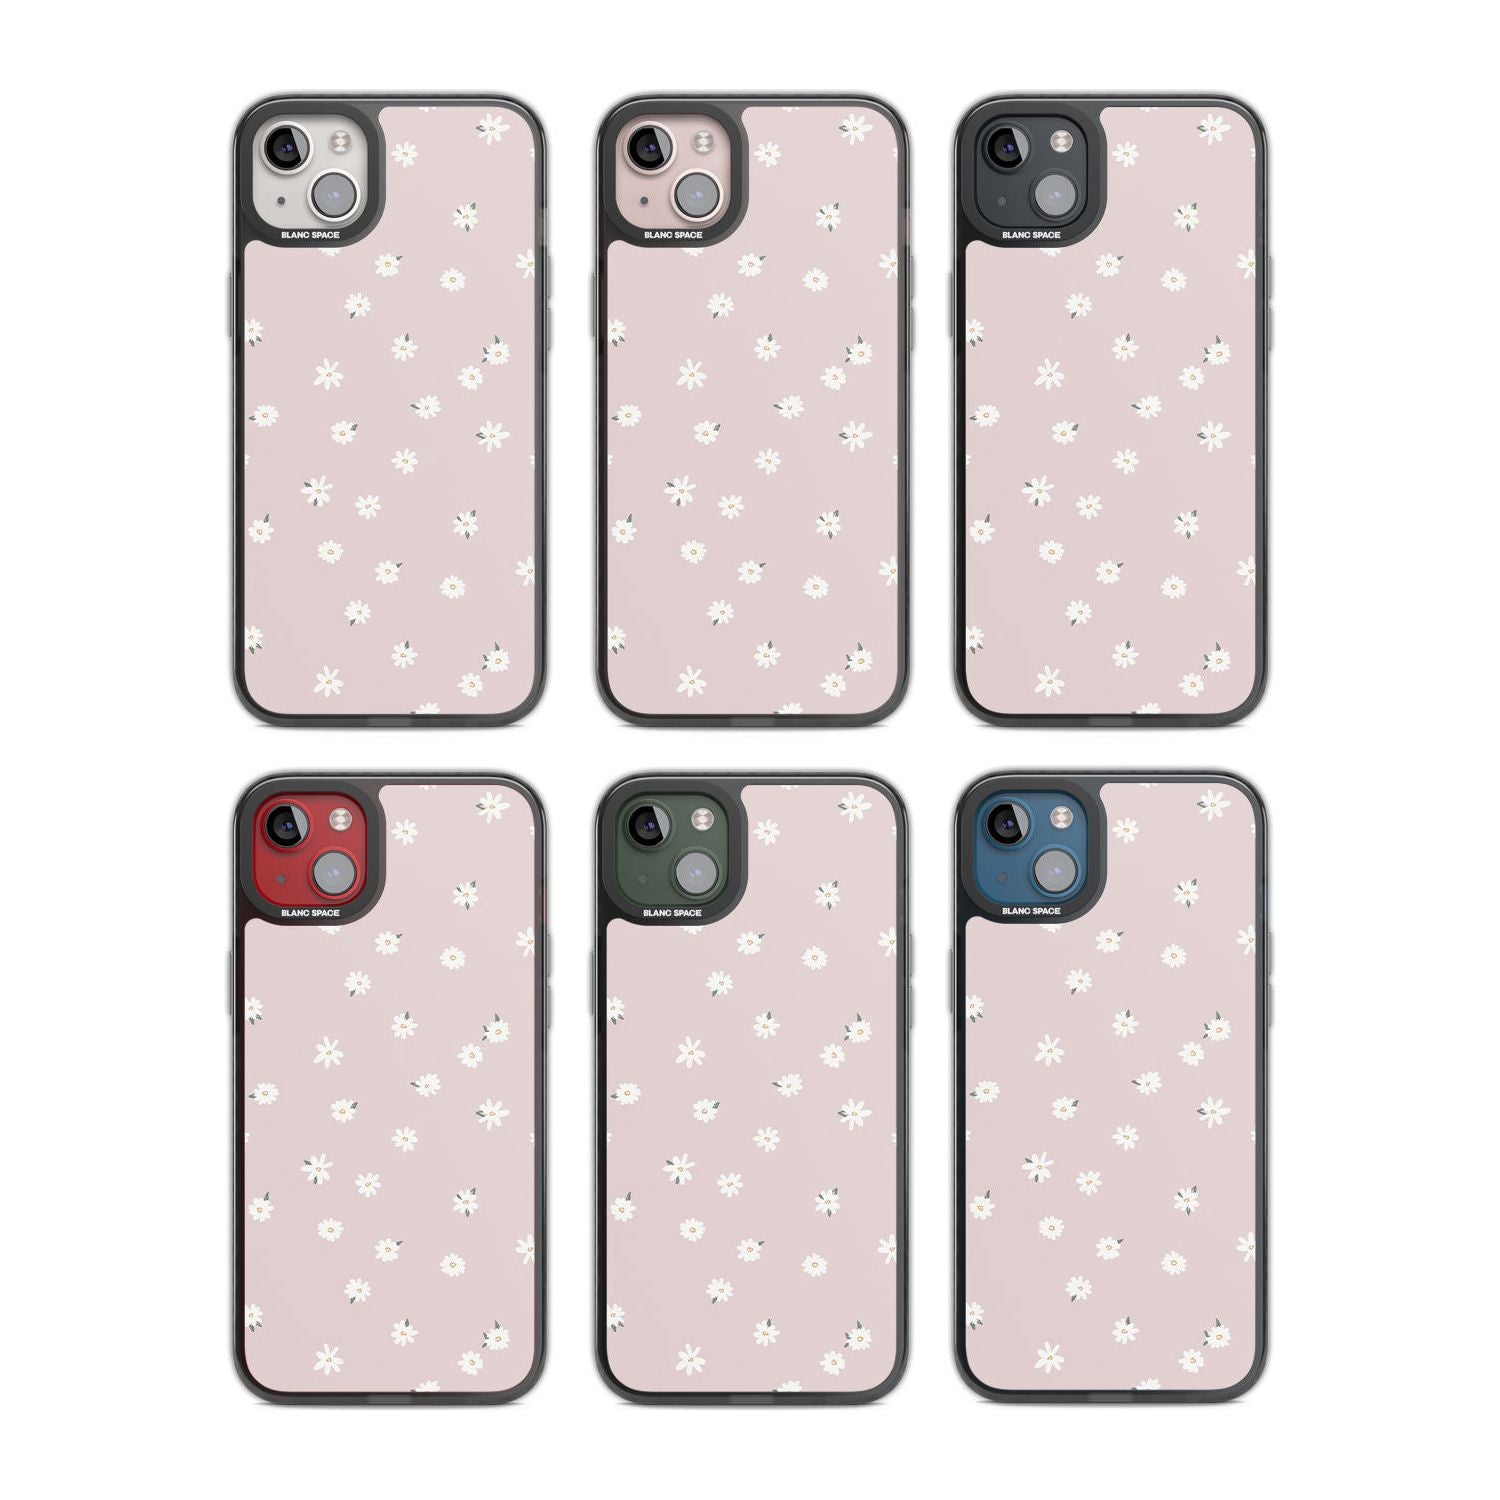 Painted Daises on Pink Phone Case iPhone 15 Pro Max / Black Impact Case,iPhone 15 Plus / Black Impact Case,iPhone 15 Pro / Black Impact Case,iPhone 15 / Black Impact Case,iPhone 15 Pro Max / Impact Case,iPhone 15 Plus / Impact Case,iPhone 15 Pro / Impact Case,iPhone 15 / Impact Case,iPhone 15 Pro Max / Magsafe Black Impact Case,iPhone 15 Plus / Magsafe Black Impact Case,iPhone 15 Pro / Magsafe Black Impact Case,iPhone 15 / Magsafe Black Impact Case,iPhone 14 Pro Max / Black Impact Case,iPhone 14 Plus / Blac